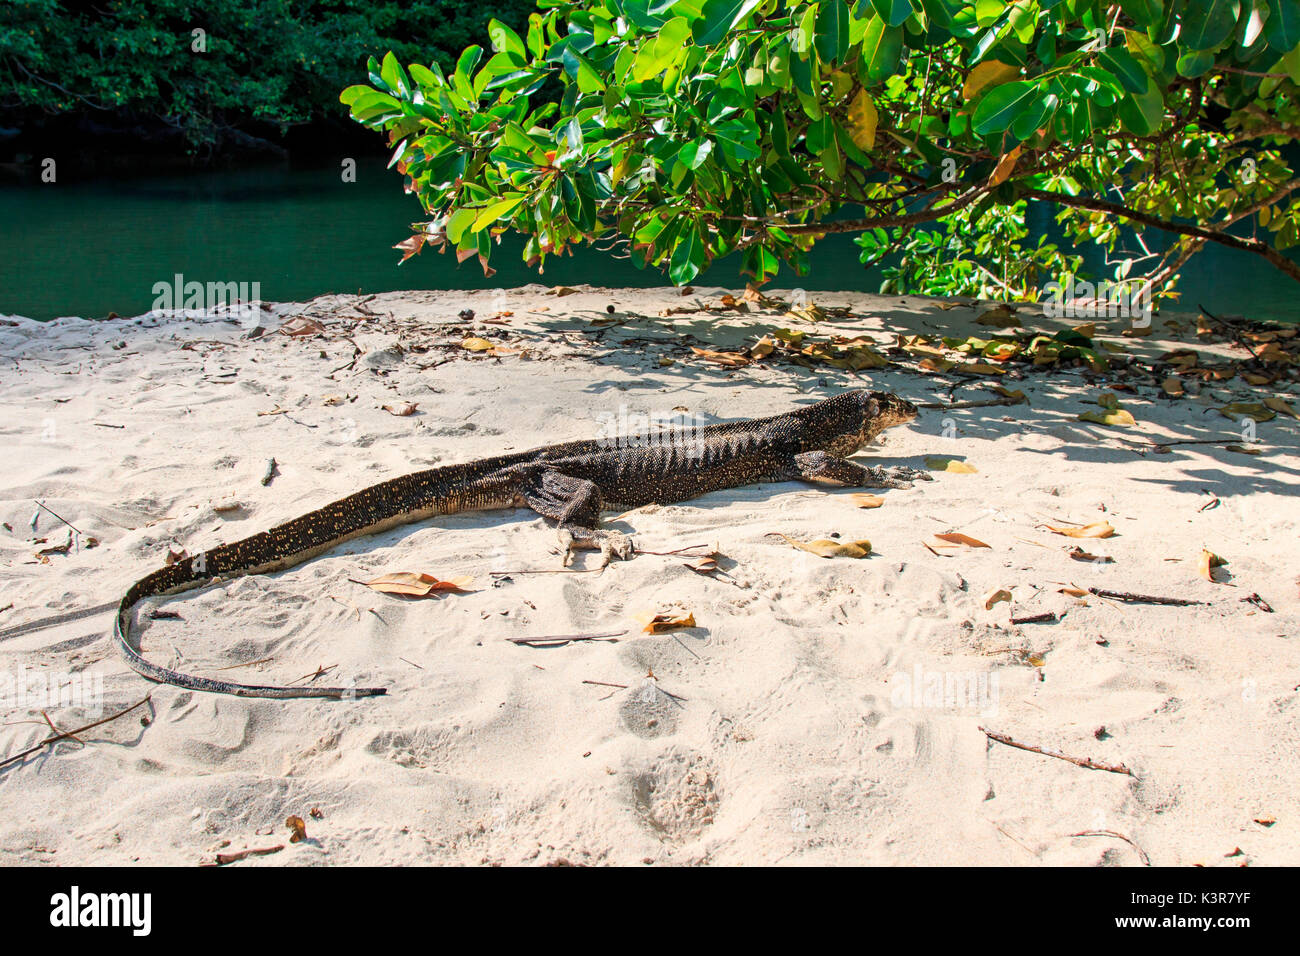 Lizard on a beach of the Philippines, Palawan water monitor Stock Photo